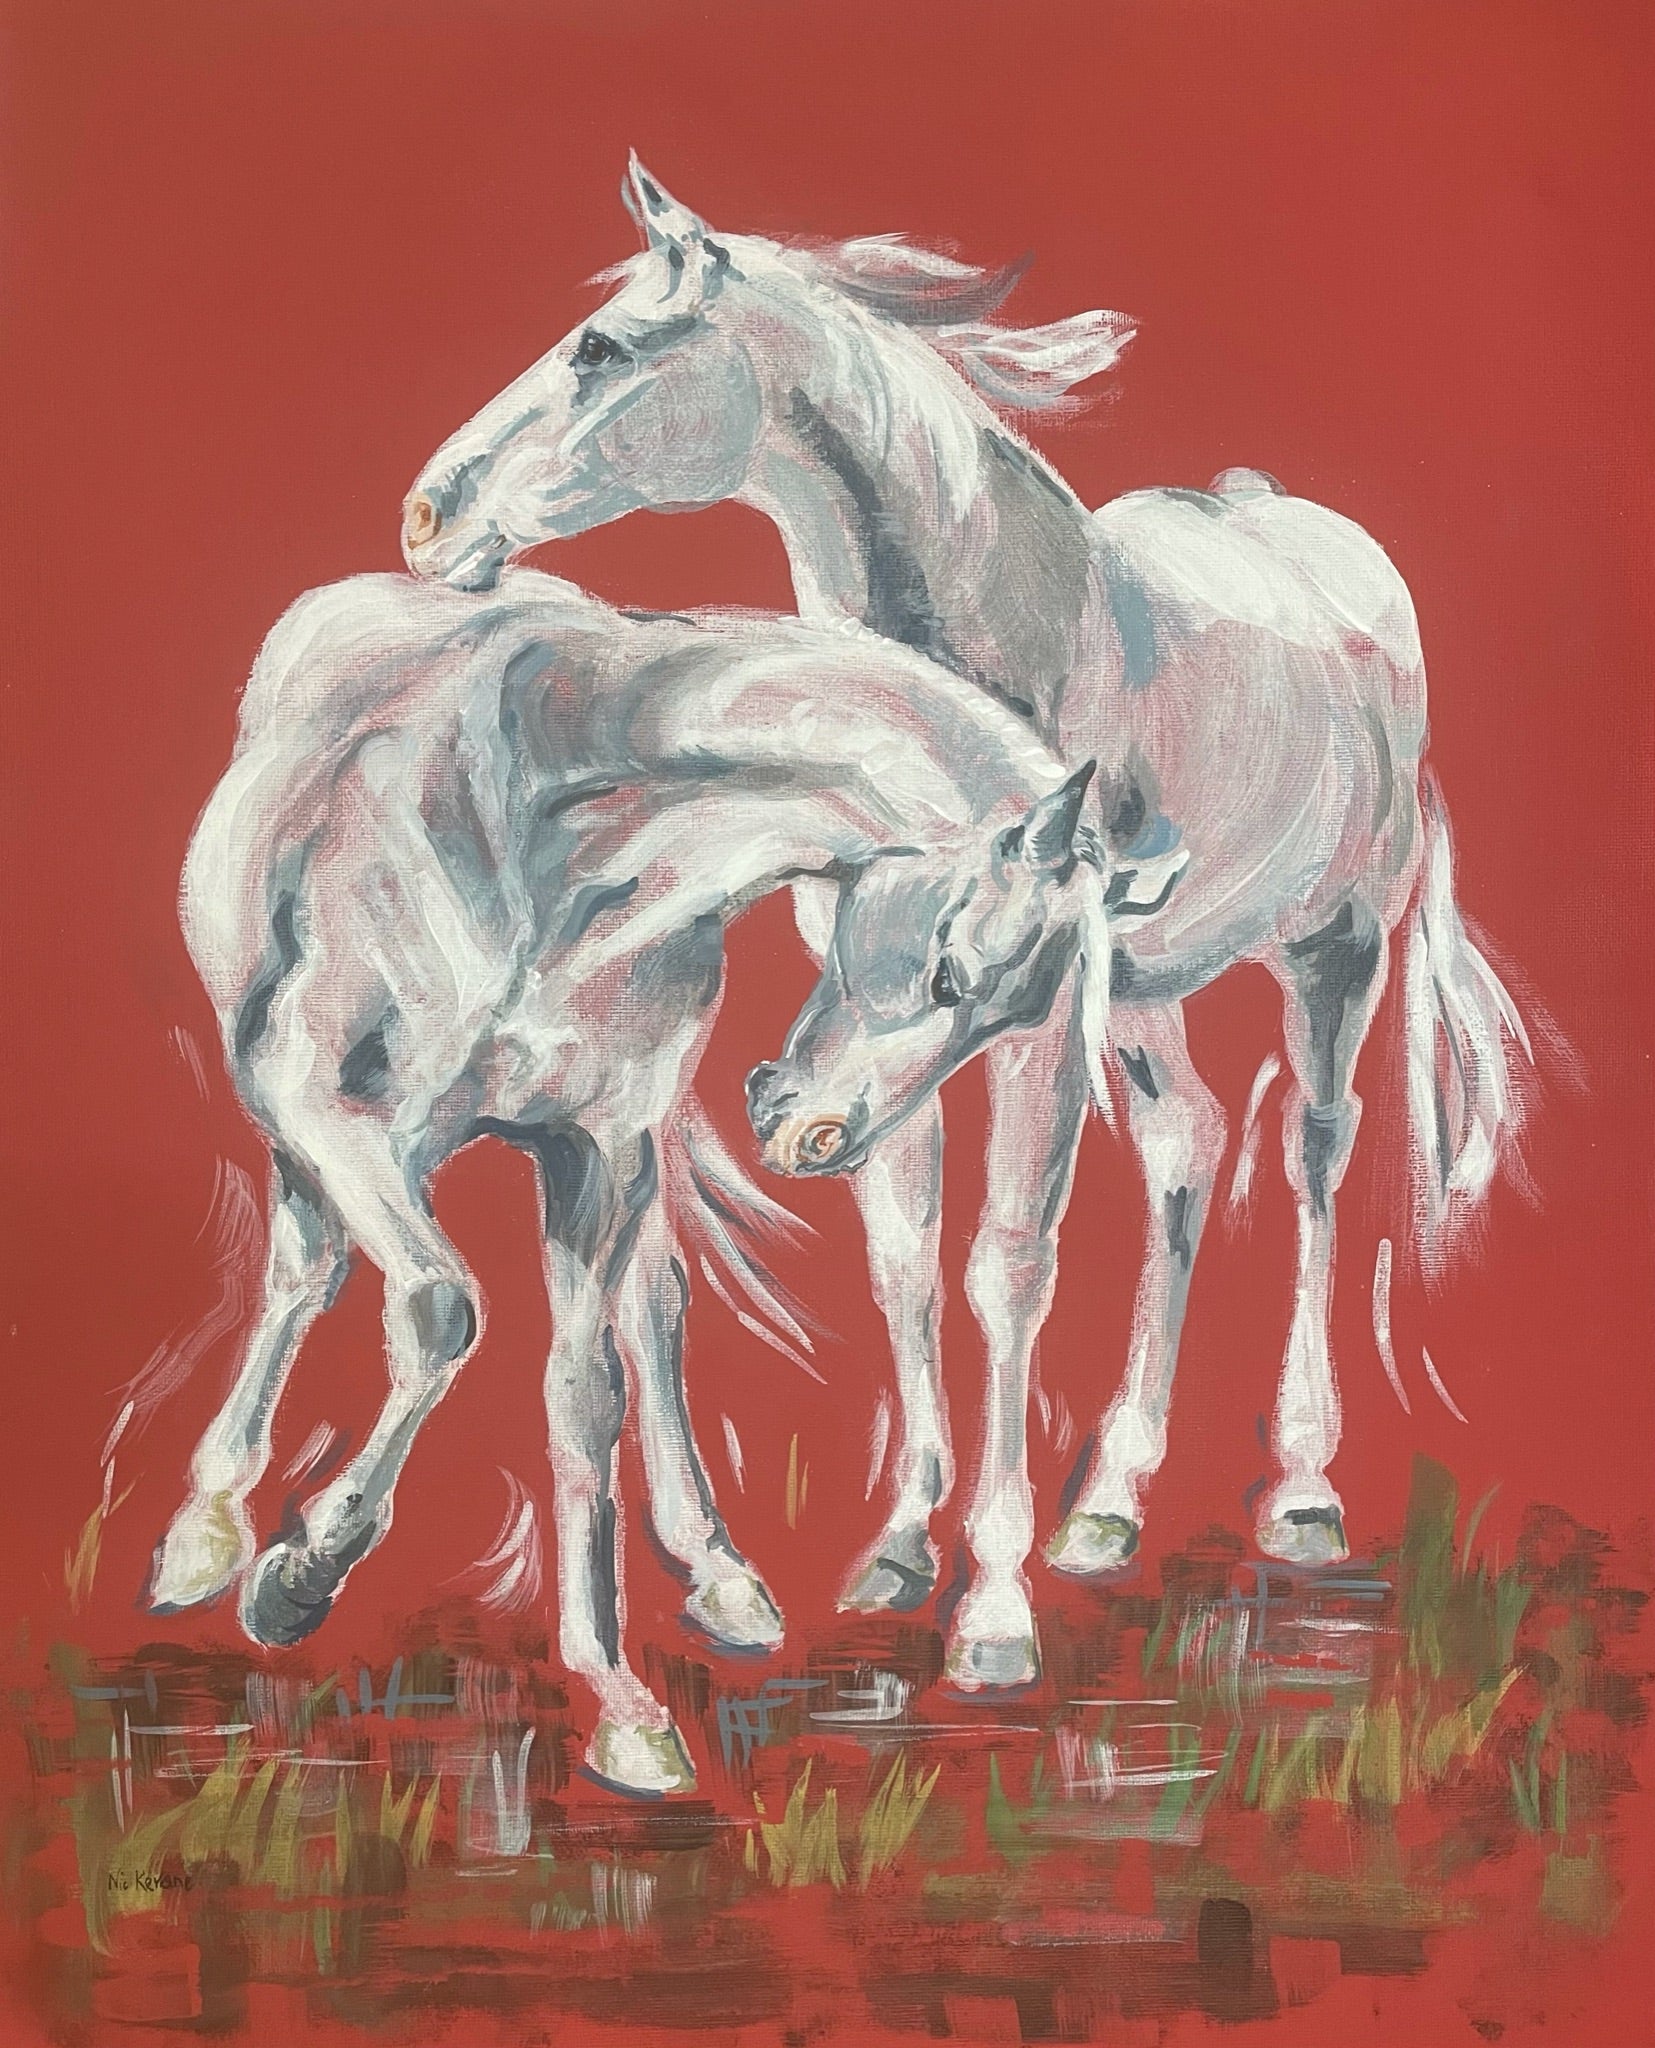 A striking original painting of two silver grey horses on a red background.